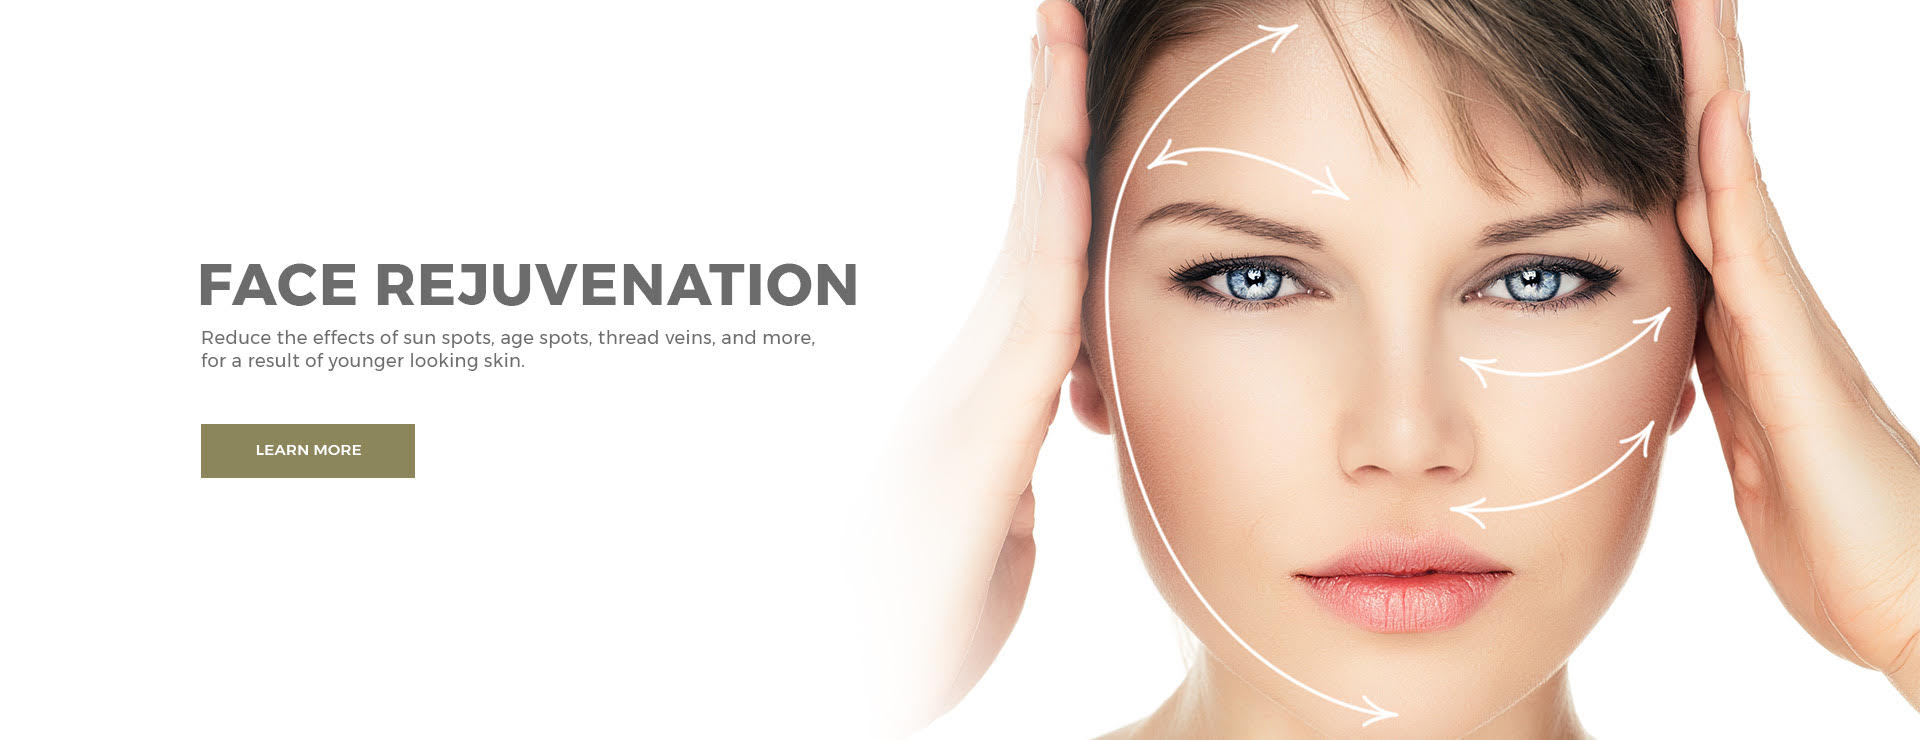 Face Rejuvenation. Reduce the effects of sun spots, age spots, thread veins, and more, for a result of younger-looking skin. Learn more.